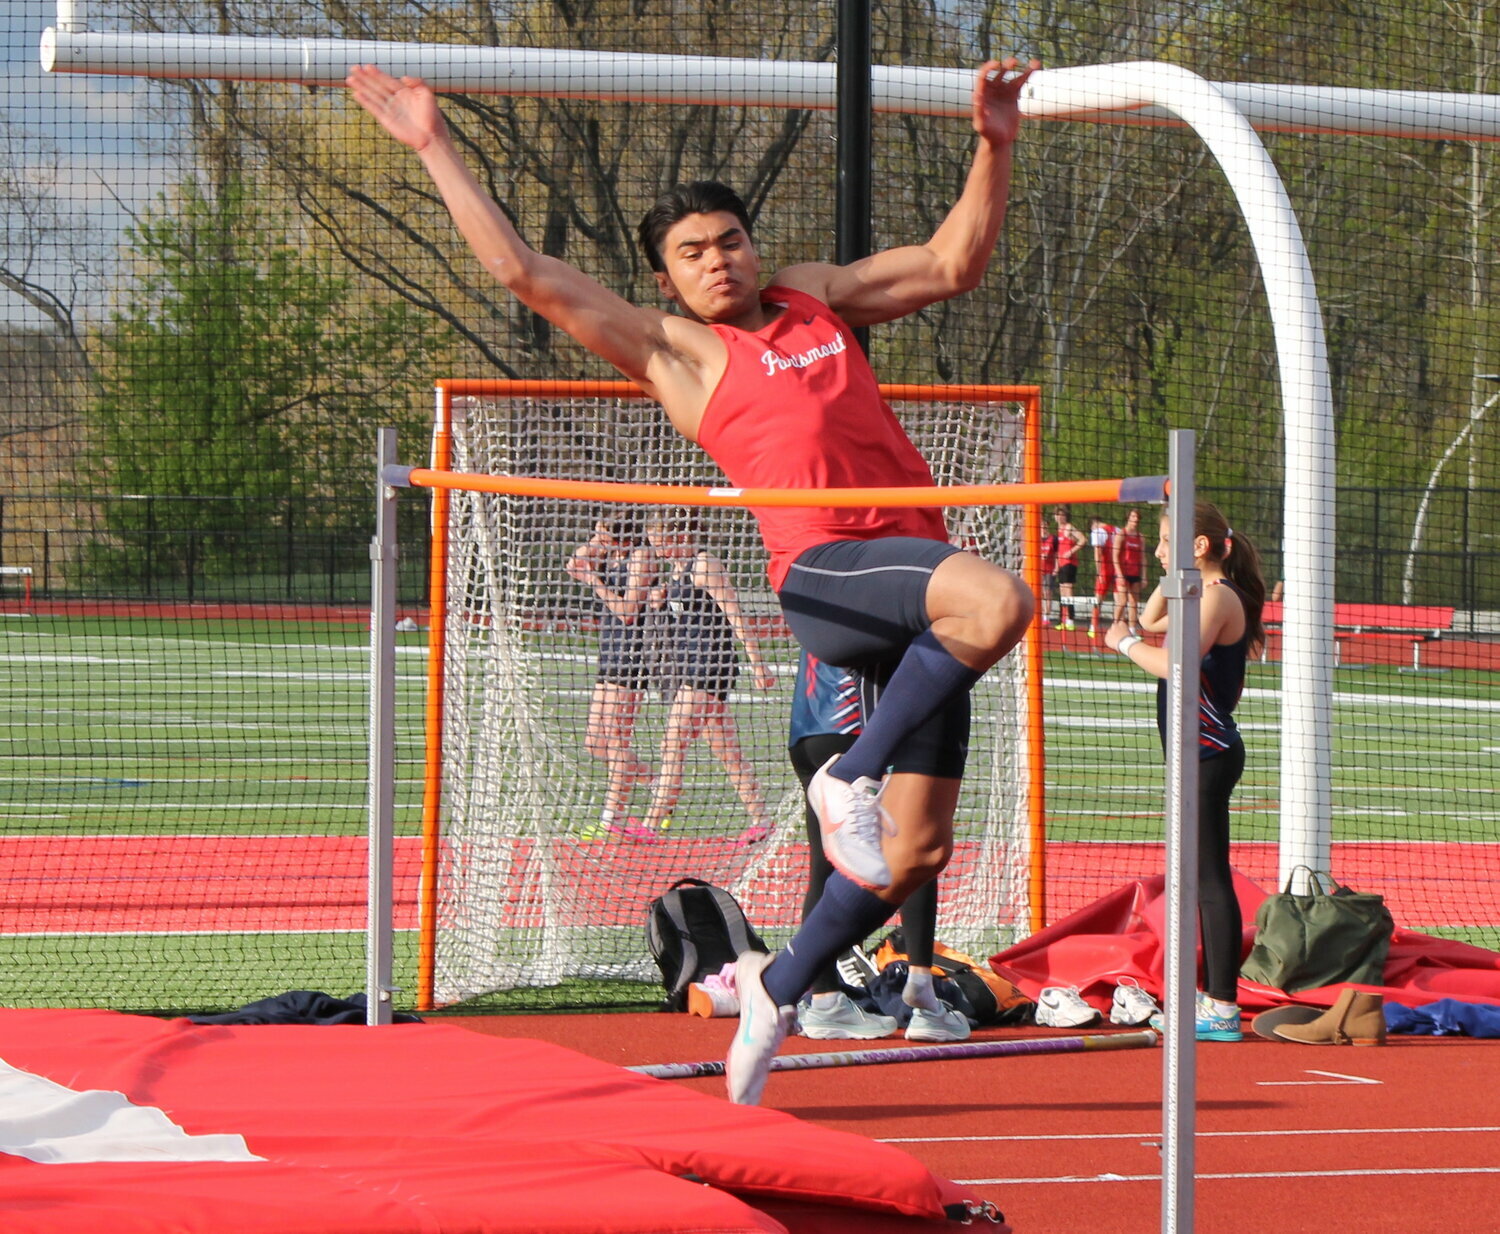 Portsmouth High’s Tristan Thomas competes in the high jump during Monday’s meet in East Providence. He won the pole vault event with a best effort of 10 feet.